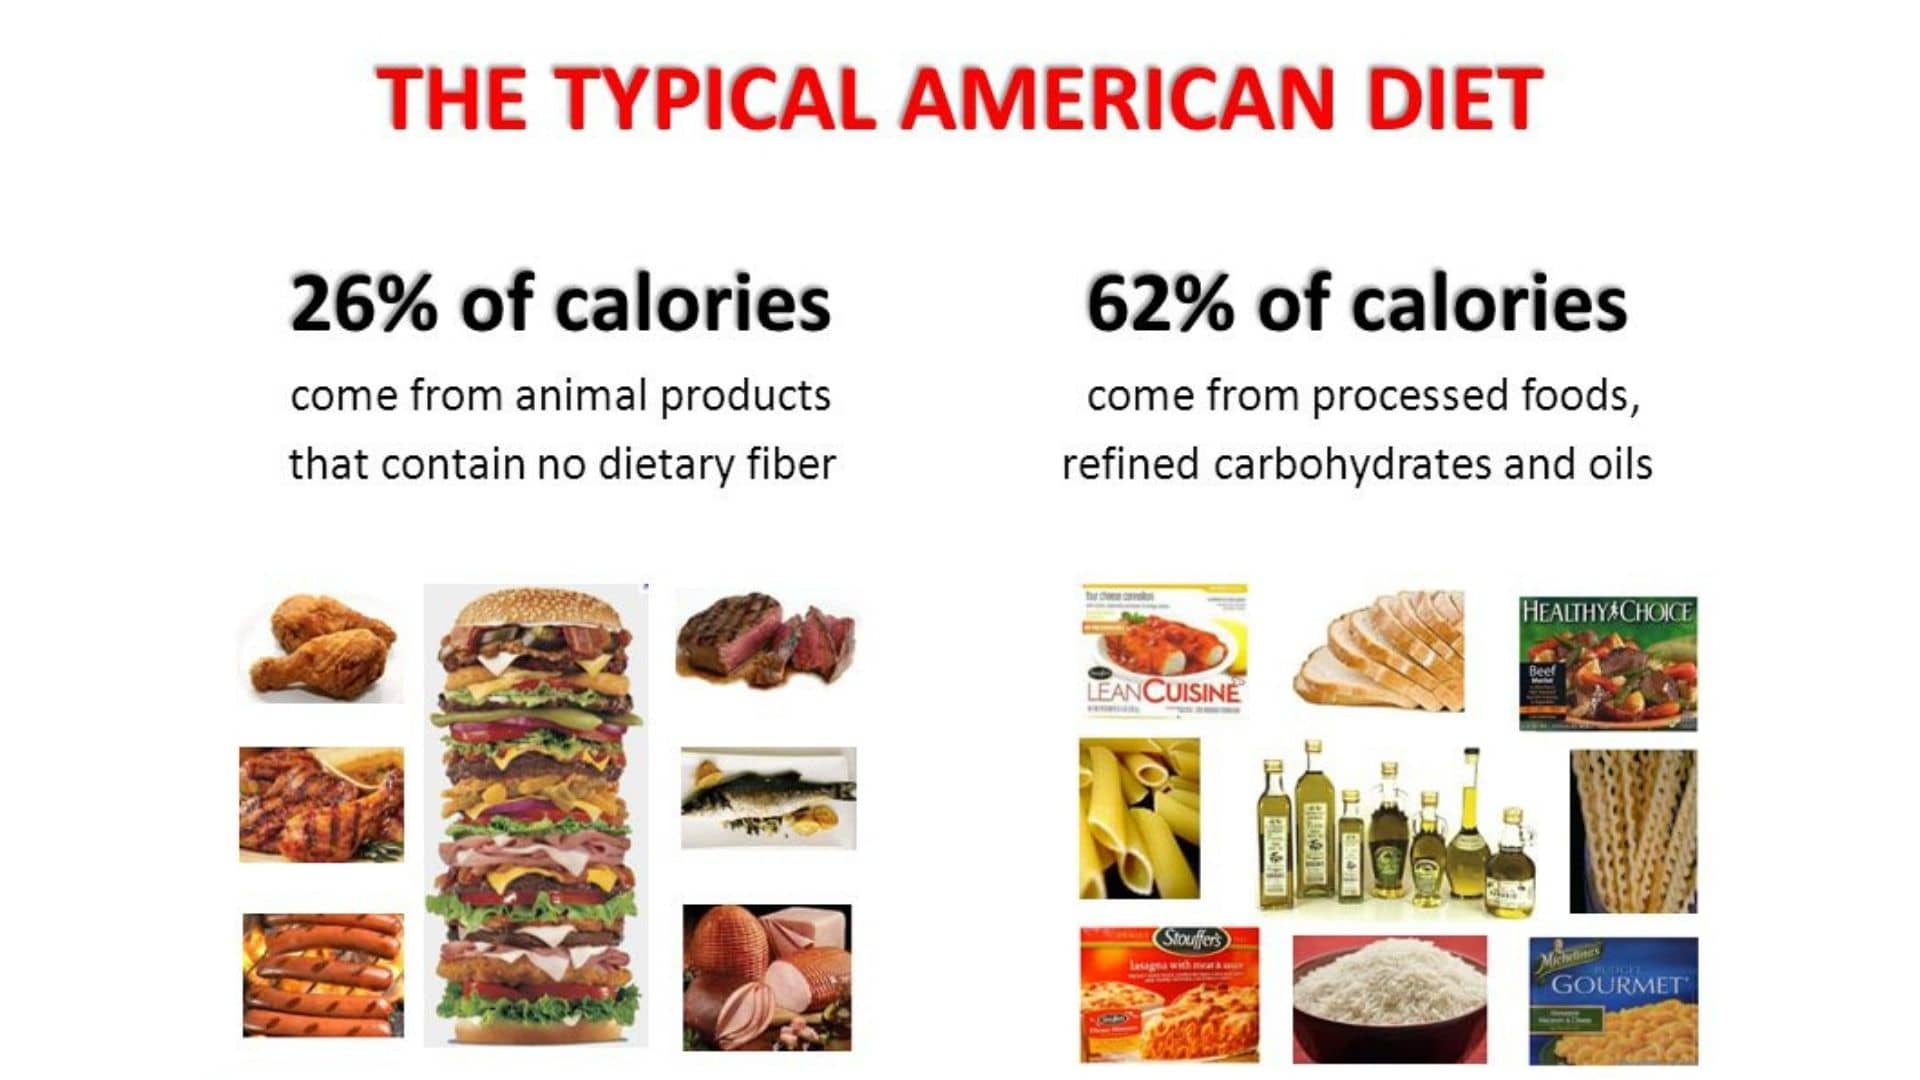 More than 60% of American's diet comes from processed foods.